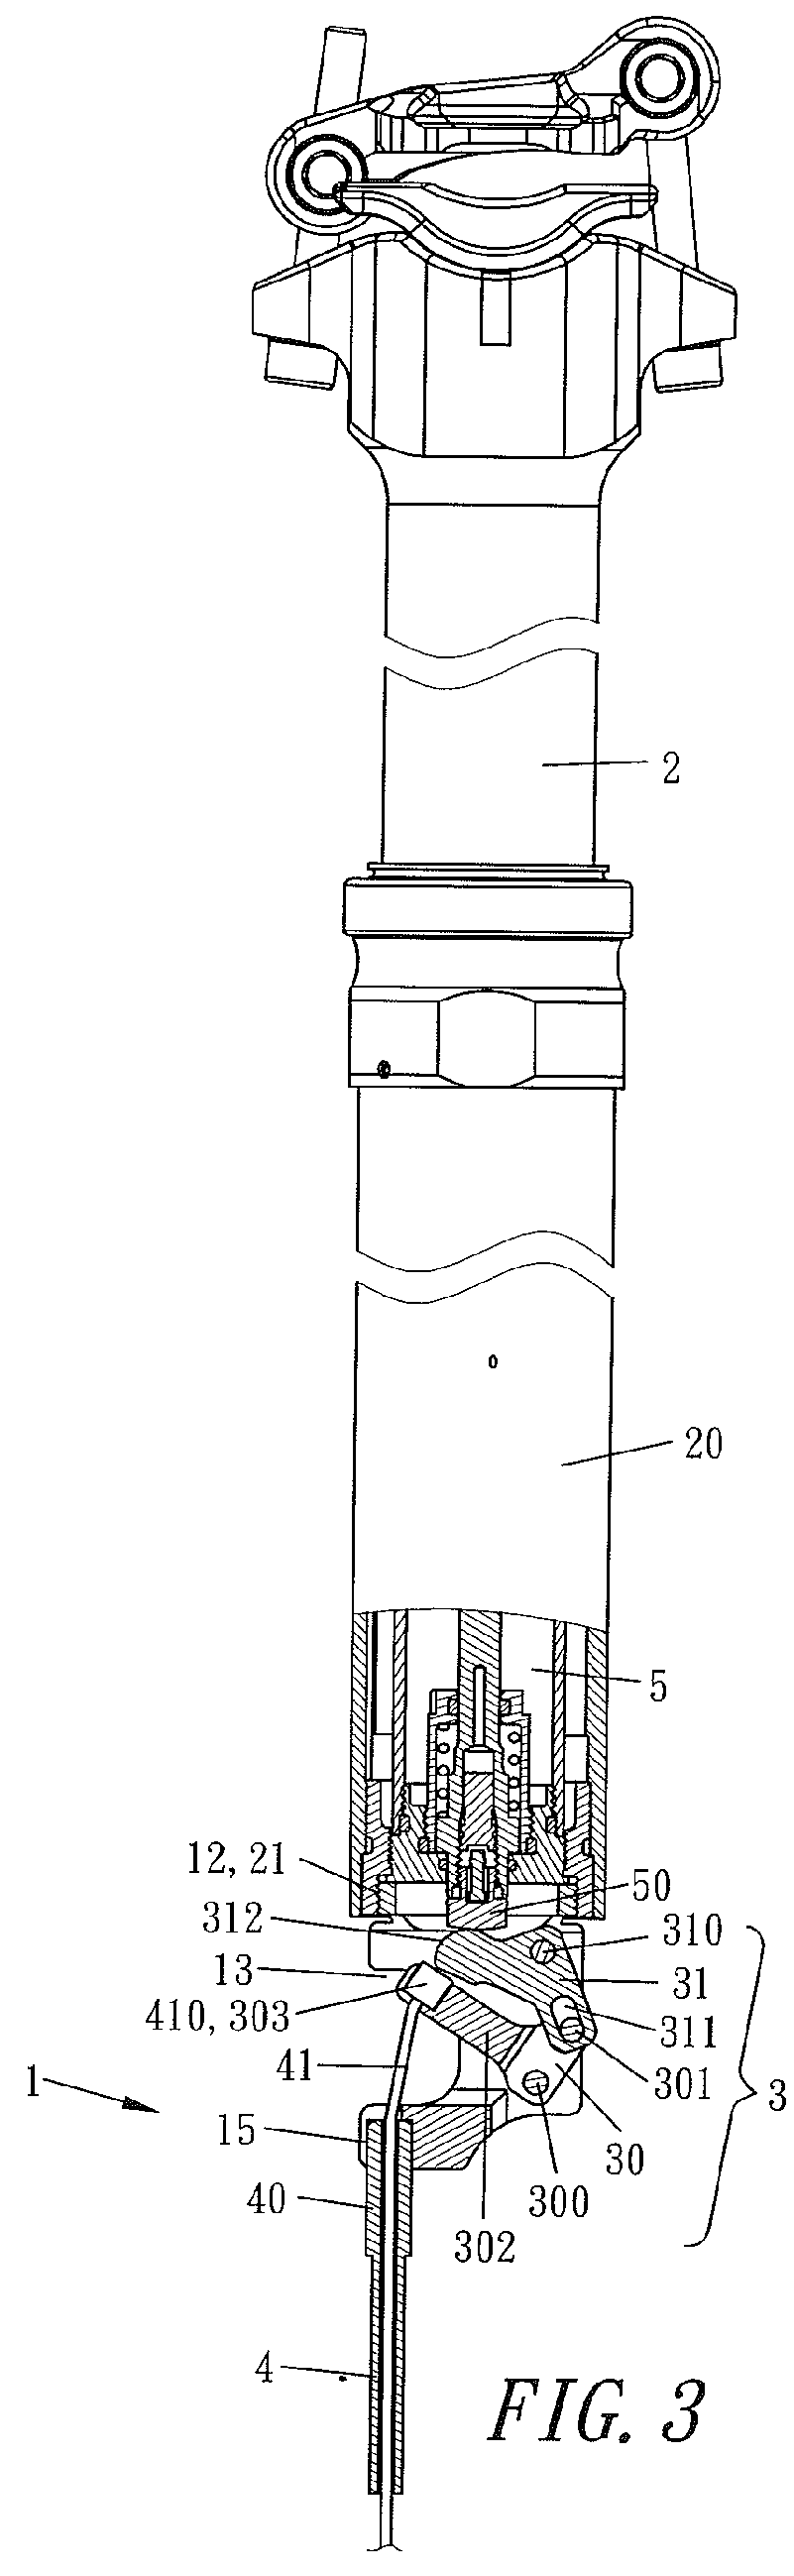 Control device of the height adjustment for a bicycle seat post